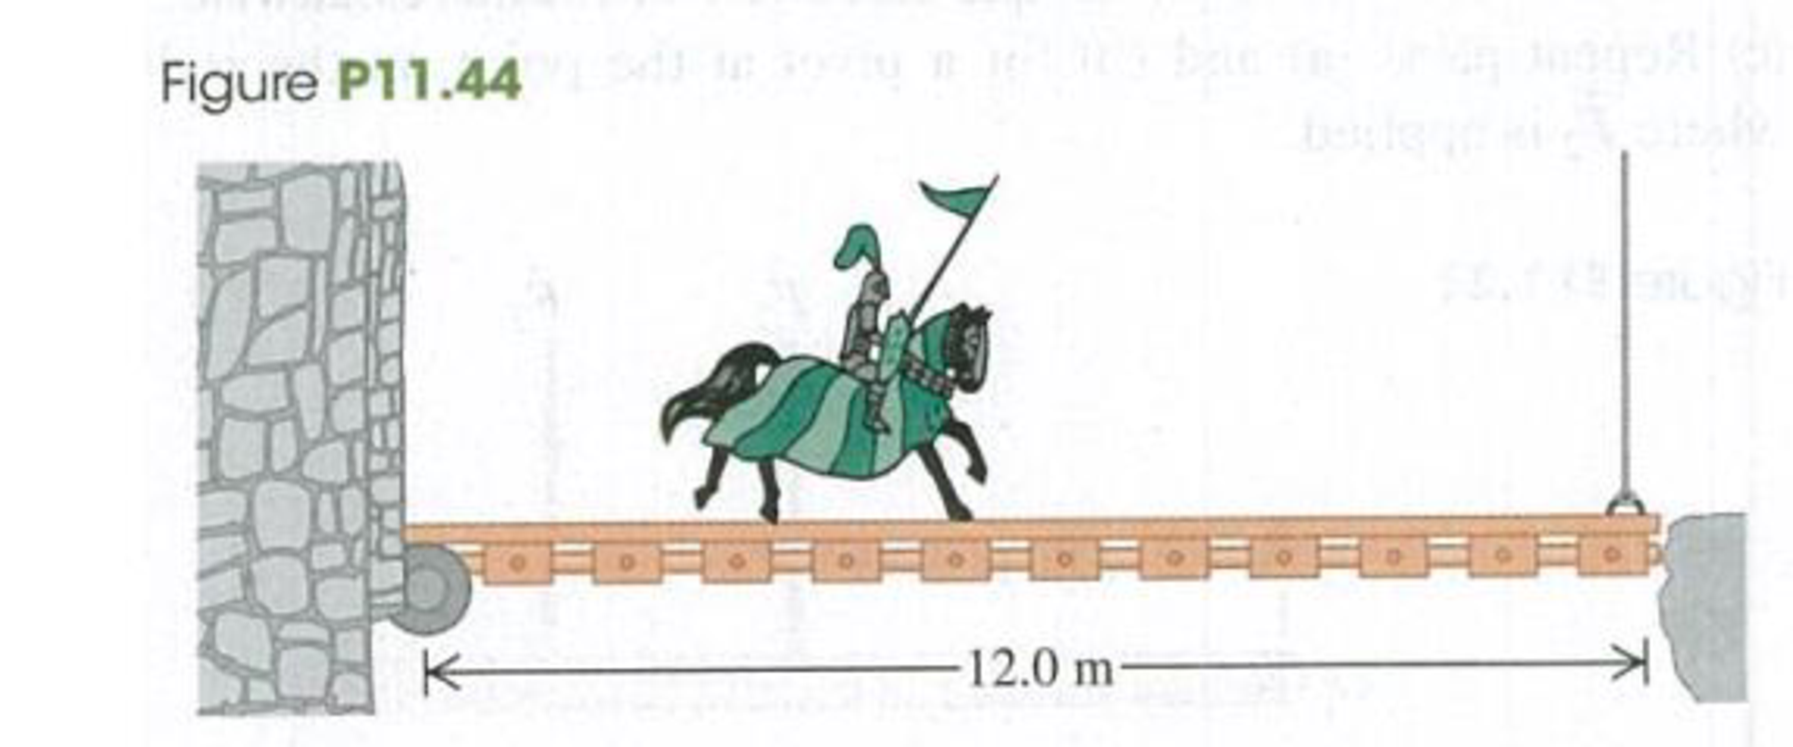 Chapter 11, Problem 11.44P, Sir Lancelot rides slowly out of the castle at Camelot and onto the 12.0-m-long drawbridge that 